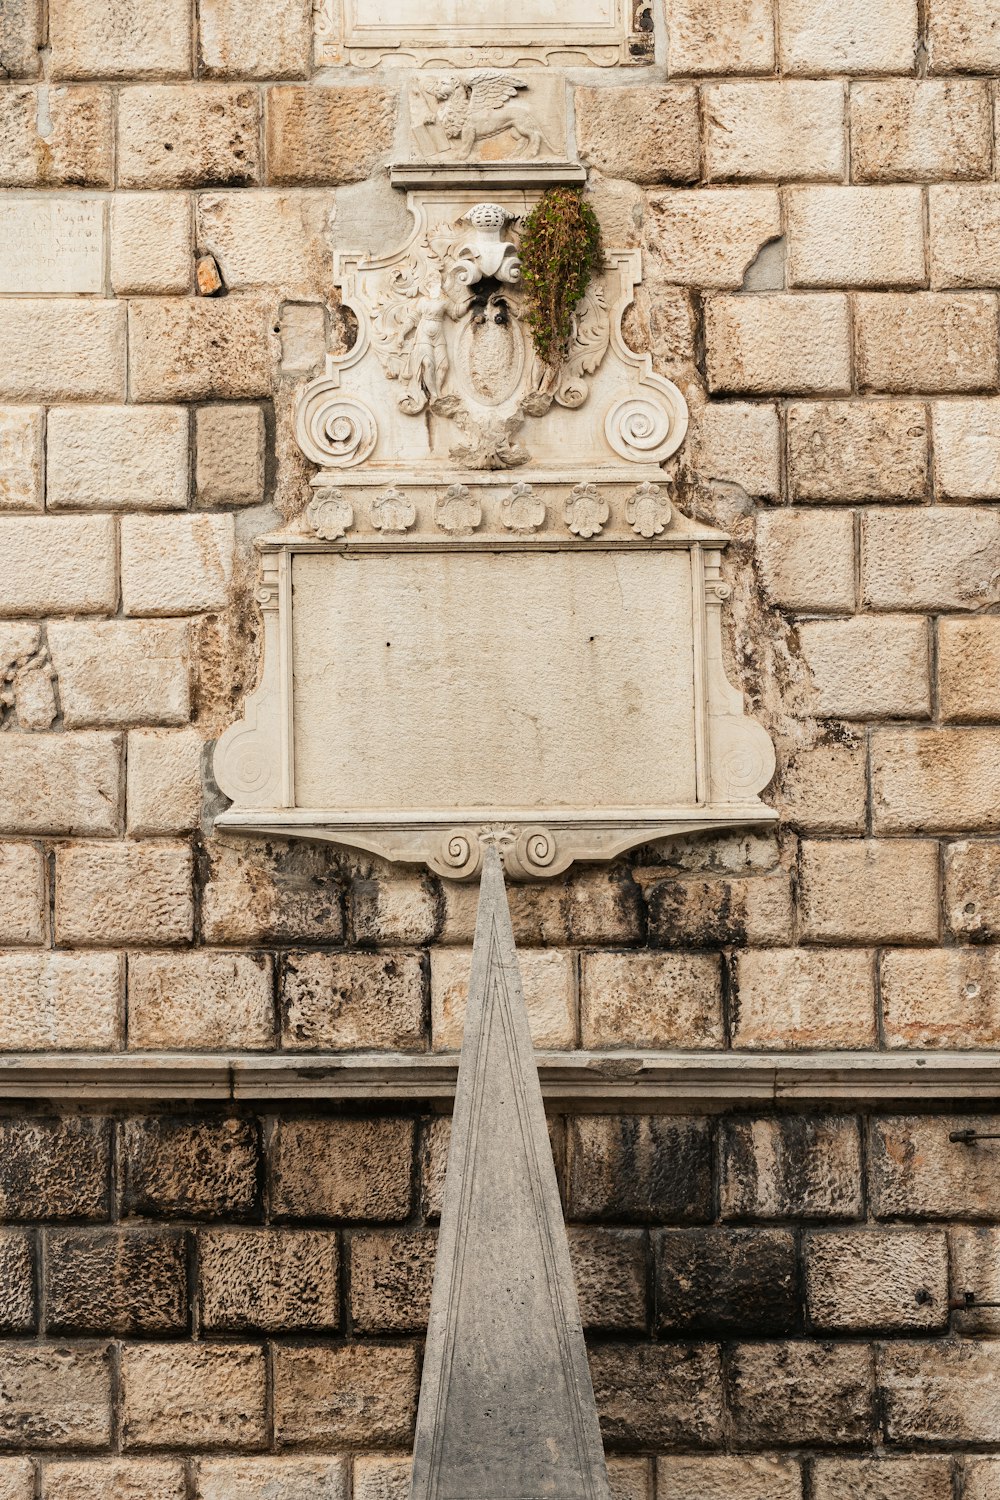 a white clock mounted to the side of a brick building